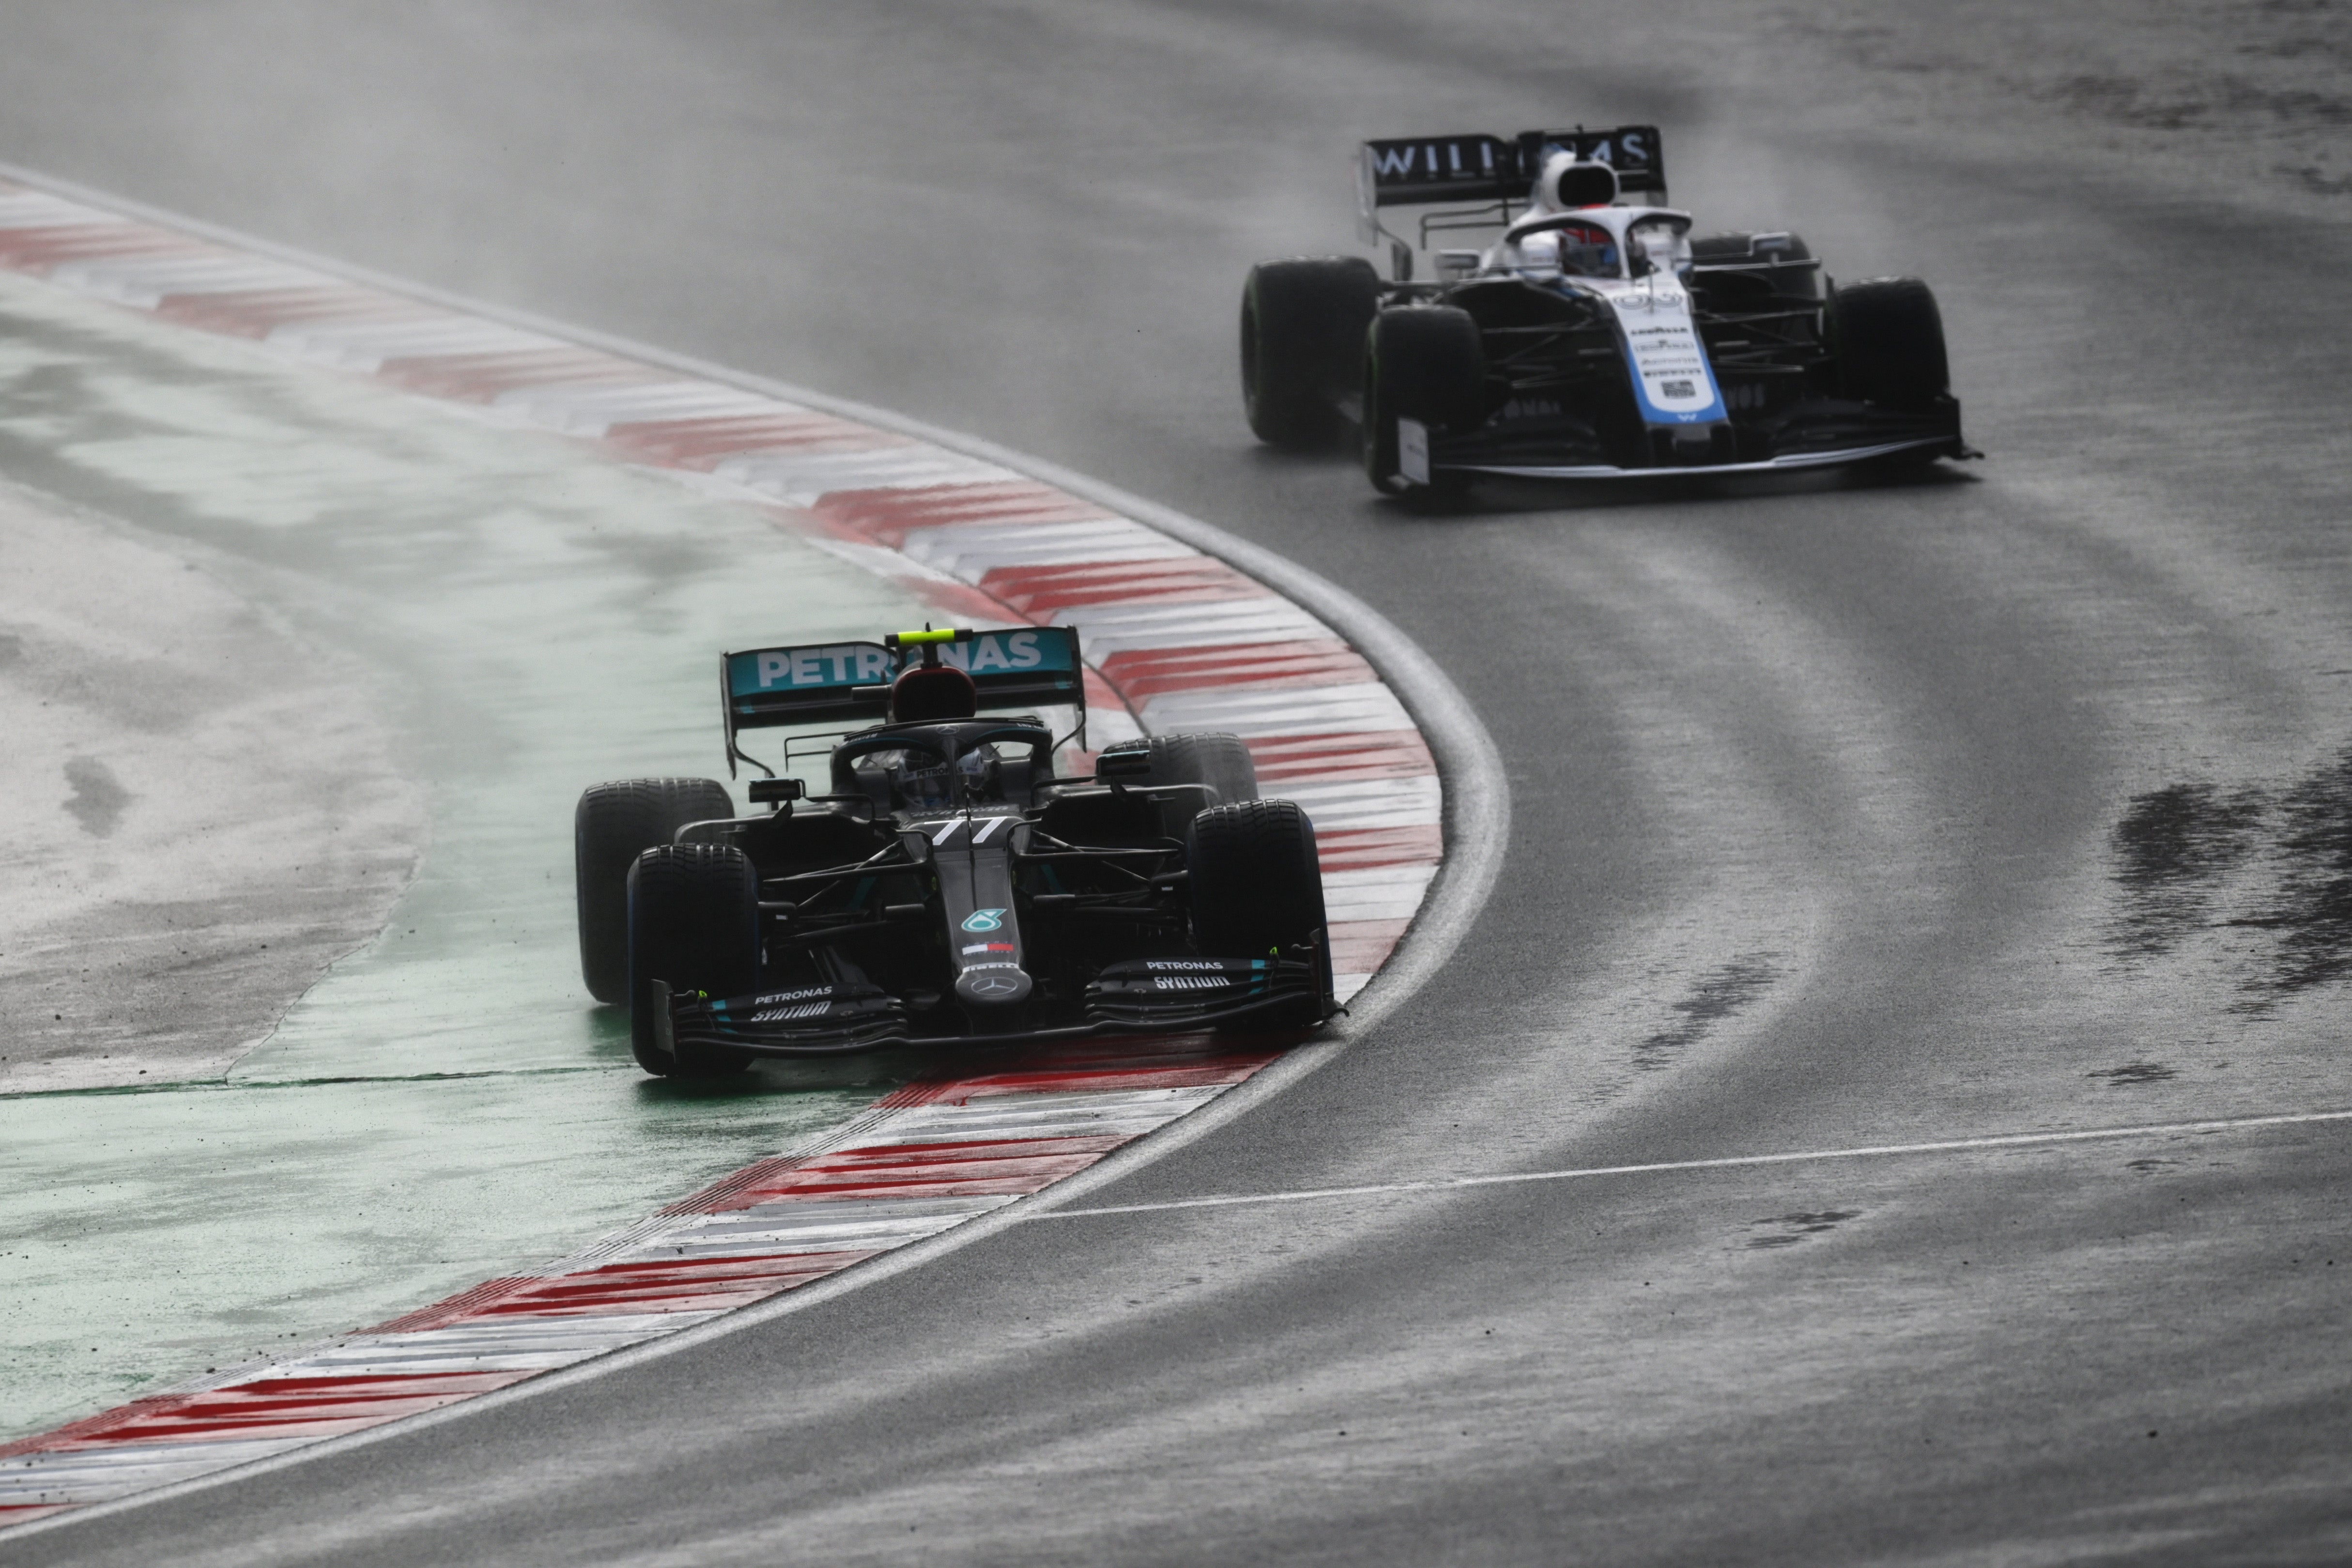 George Russell found himself battling with the out-of-form Valtteri Bottas